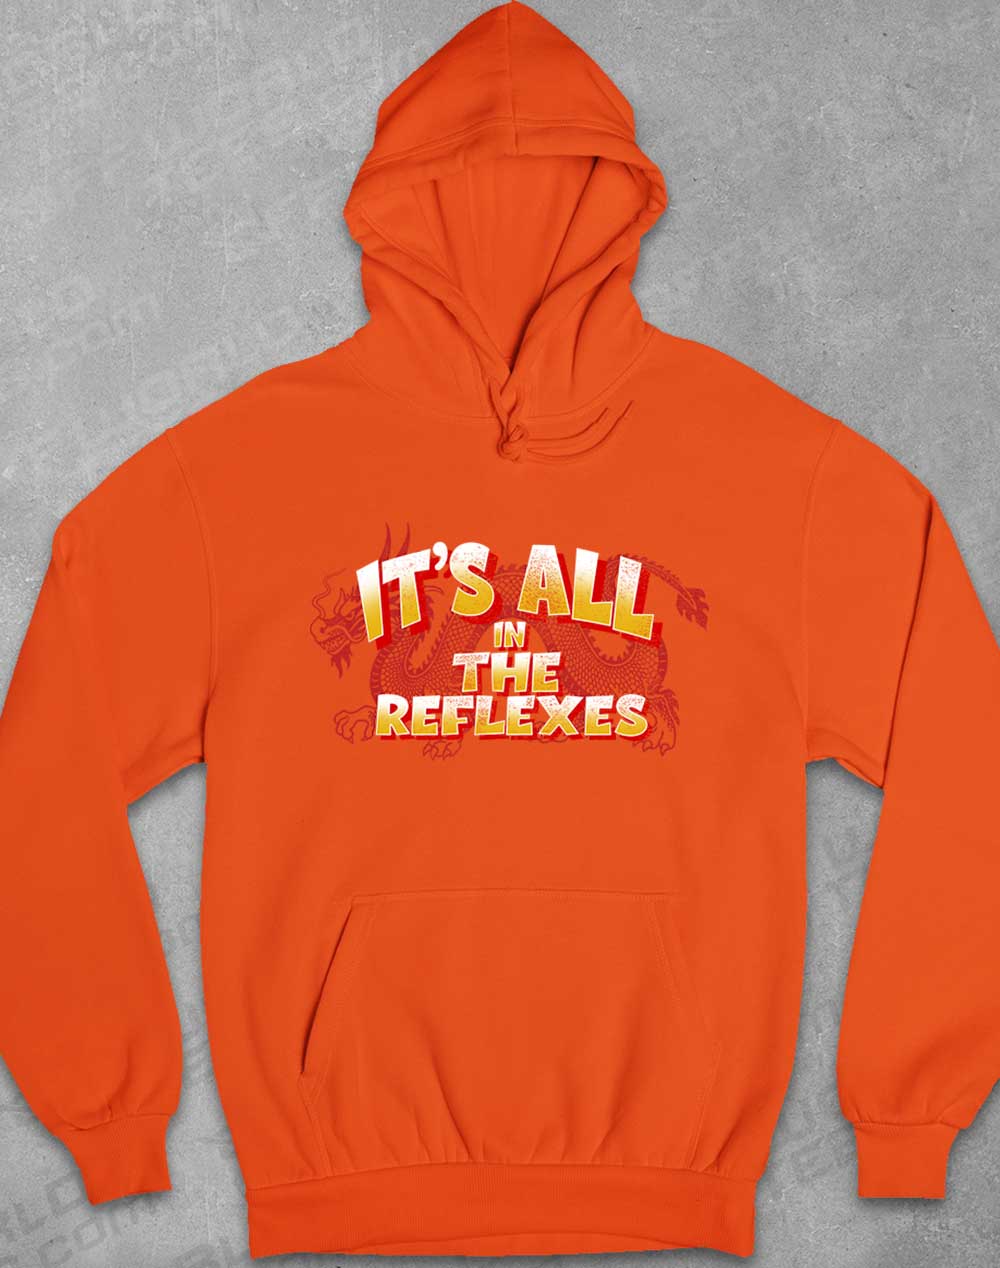 Sunset Orange - It's All in the Reflexes Hoodie